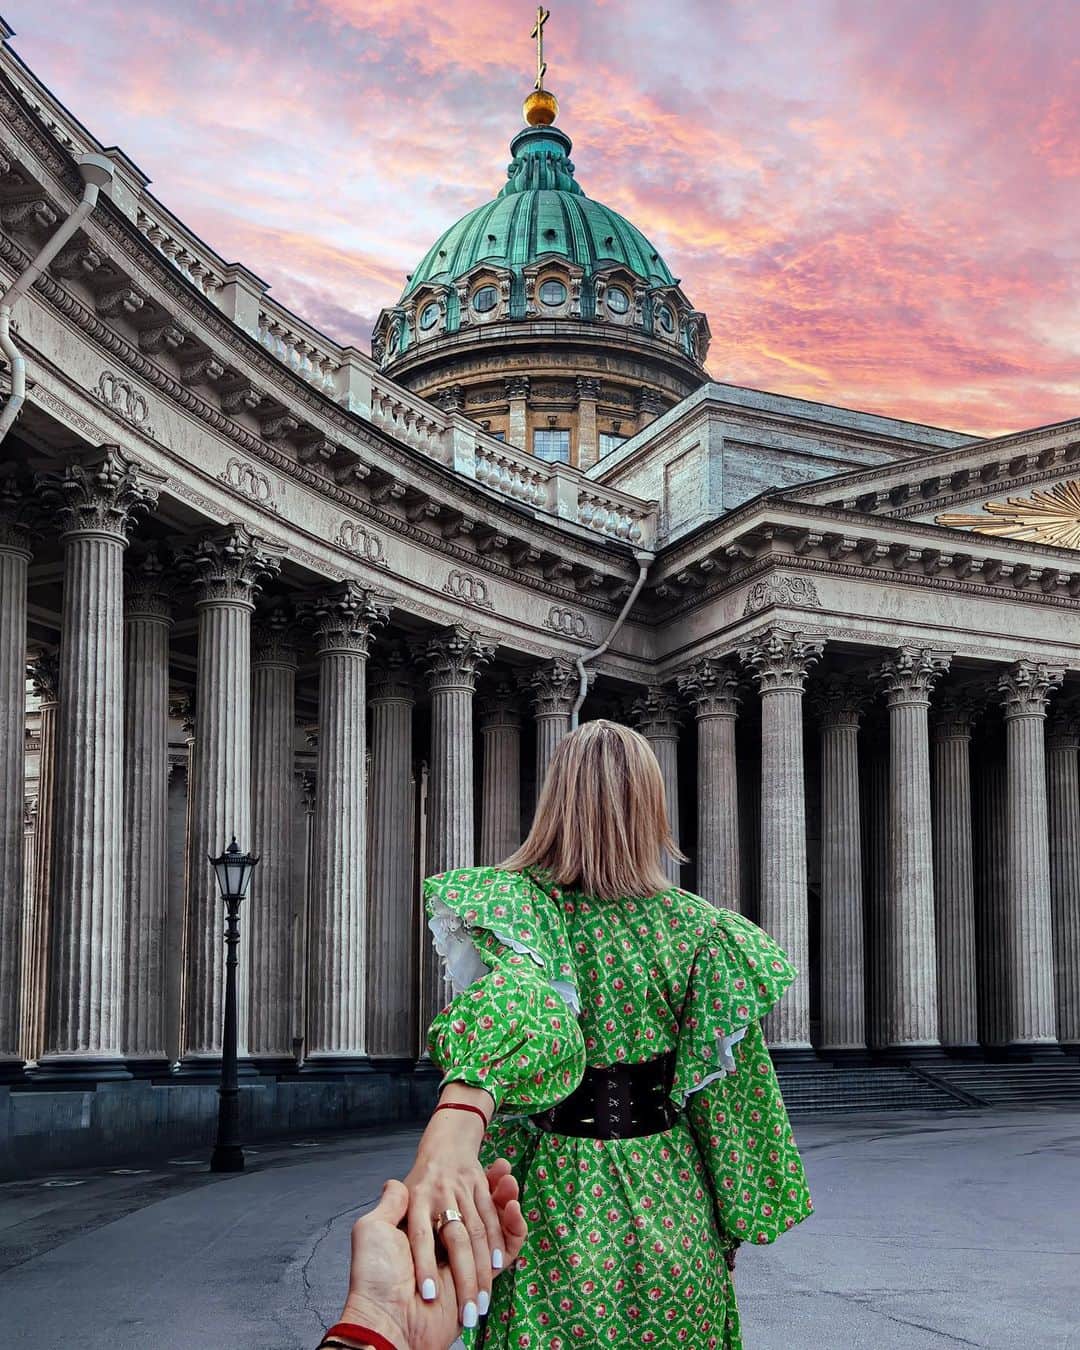 Murad Osmannのインスタグラム：「#followmeto Kazan Cathedral in Saint Petersburg. It was inspired by the cathedrals of Rome and Florence. The famous Russian warlord Kutuzov, who fought against Napoleon during the french invasion into the Russian Empire, is buried there!!  Shot with #HONOR9A which has a long life battery to ensure I can capture the beauty of St Petersburg all day long!  #poweryourlife @honorglobal   🇷🇺 Следуйзамной к Казанскому Собору в Санкт-Петербурге - храму воинской славы. Павел I хотел, чтобы новое здание напоминало римский собор Святого Петра.  Знаменитый русский полководец, генерал-фельдмаршал, светлейший князь Смоленский Михаил Илларионович Голенищев-Кутузов тут похоронен」